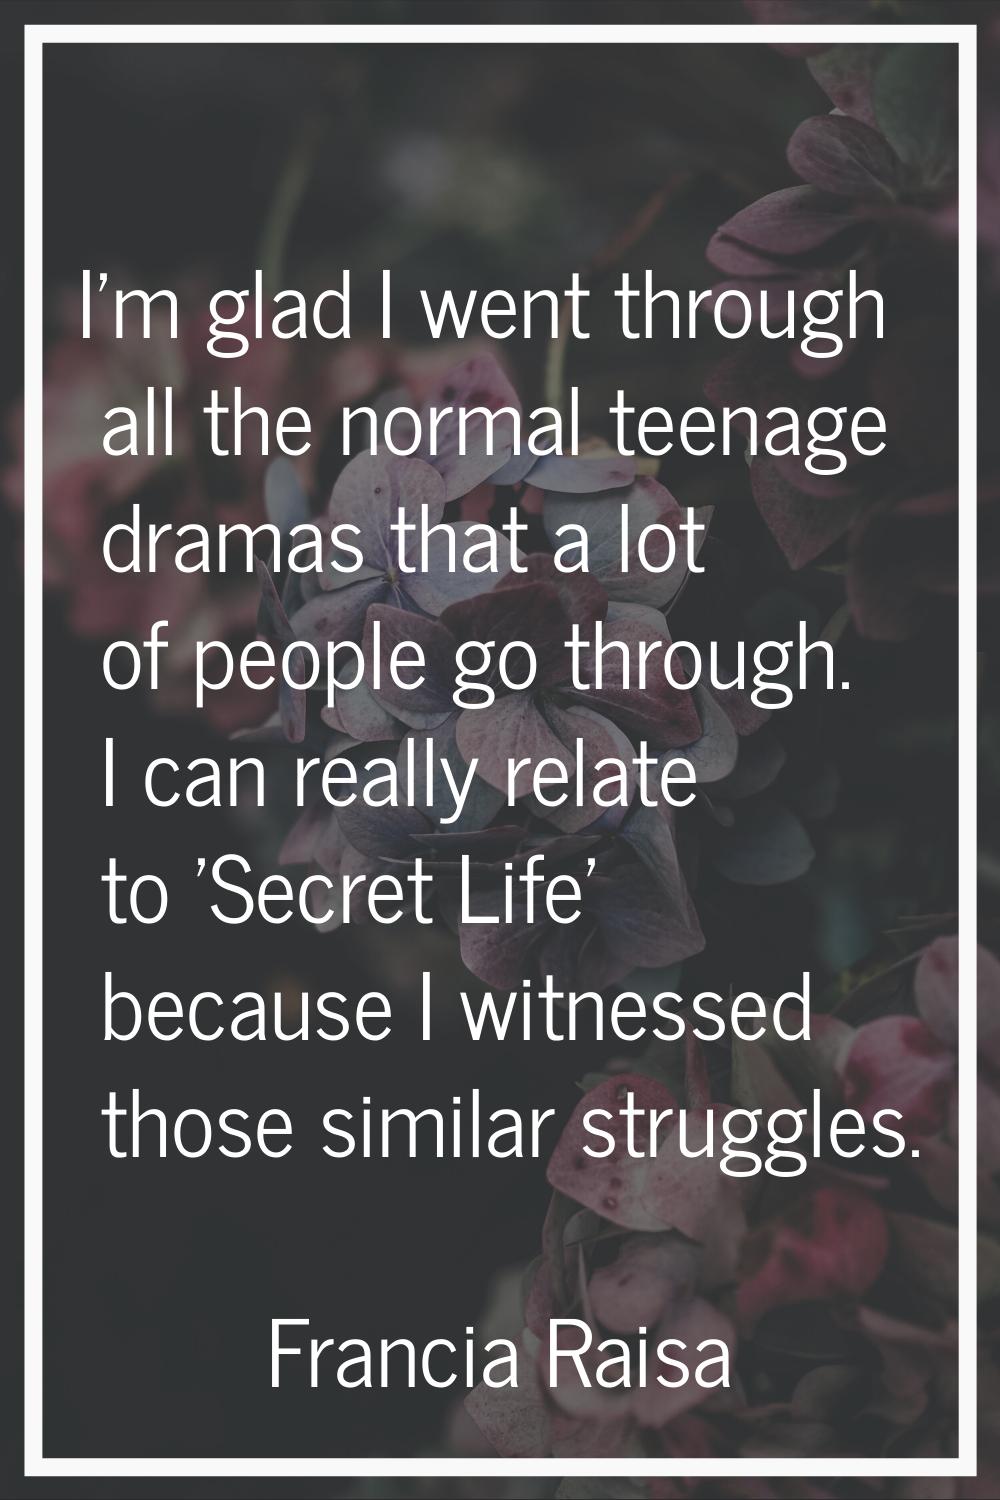 I'm glad I went through all the normal teenage dramas that a lot of people go through. I can really